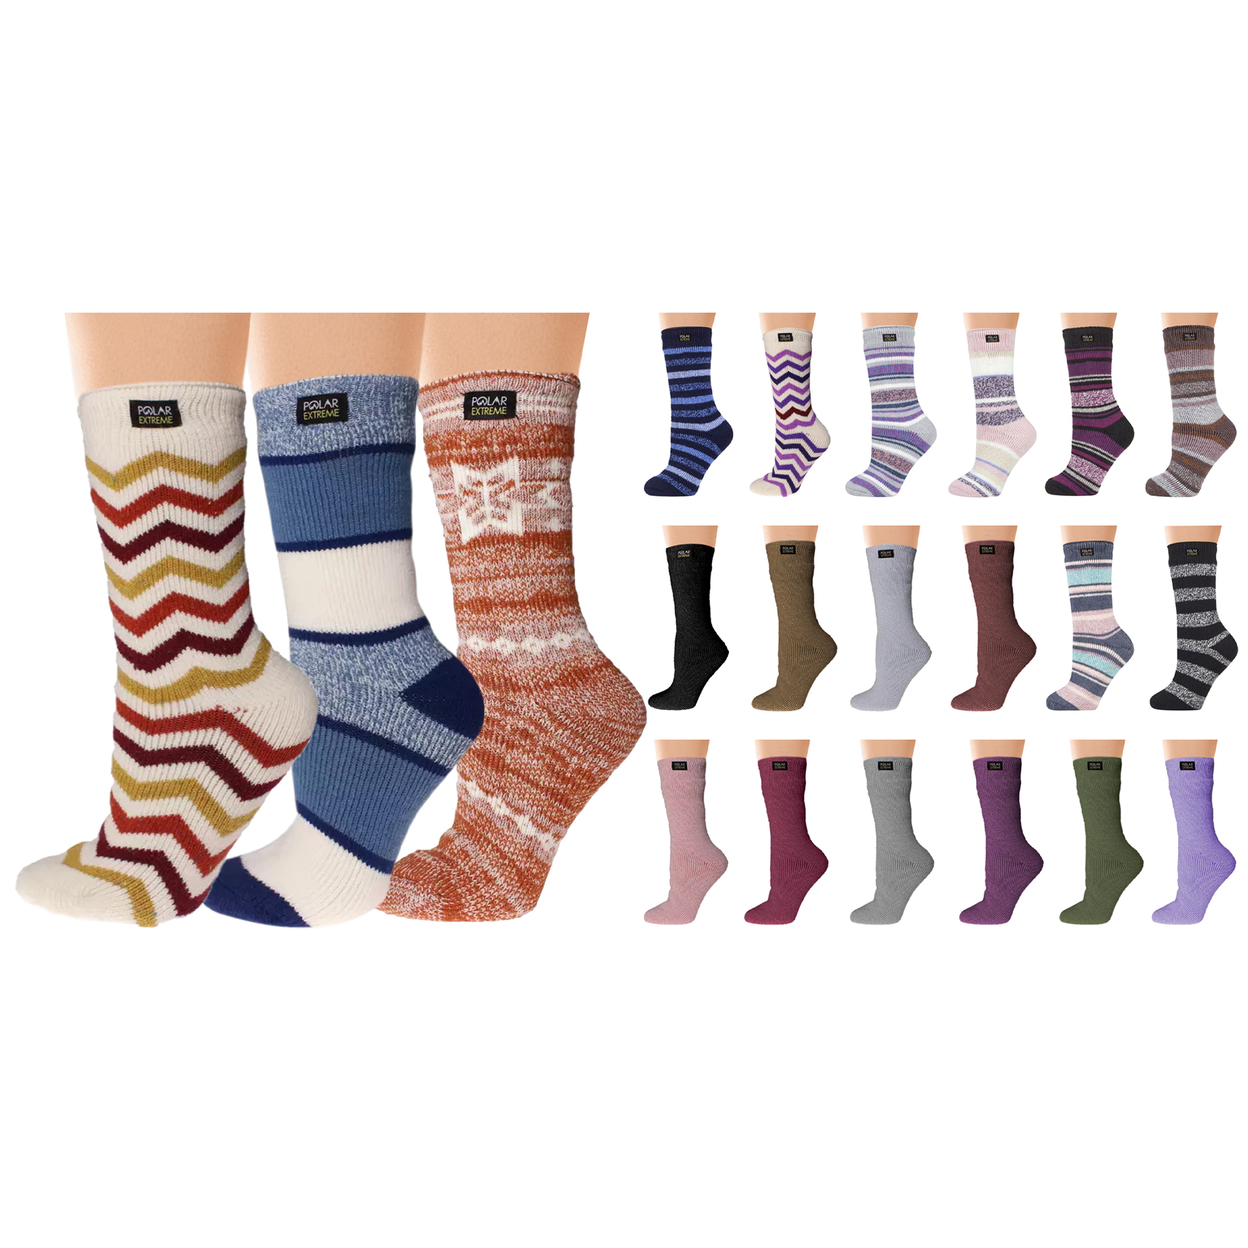 3-Pairs: Women's Polar Extreme Insulated Thermal Ultra-Soft Winter Warm Crew Socks